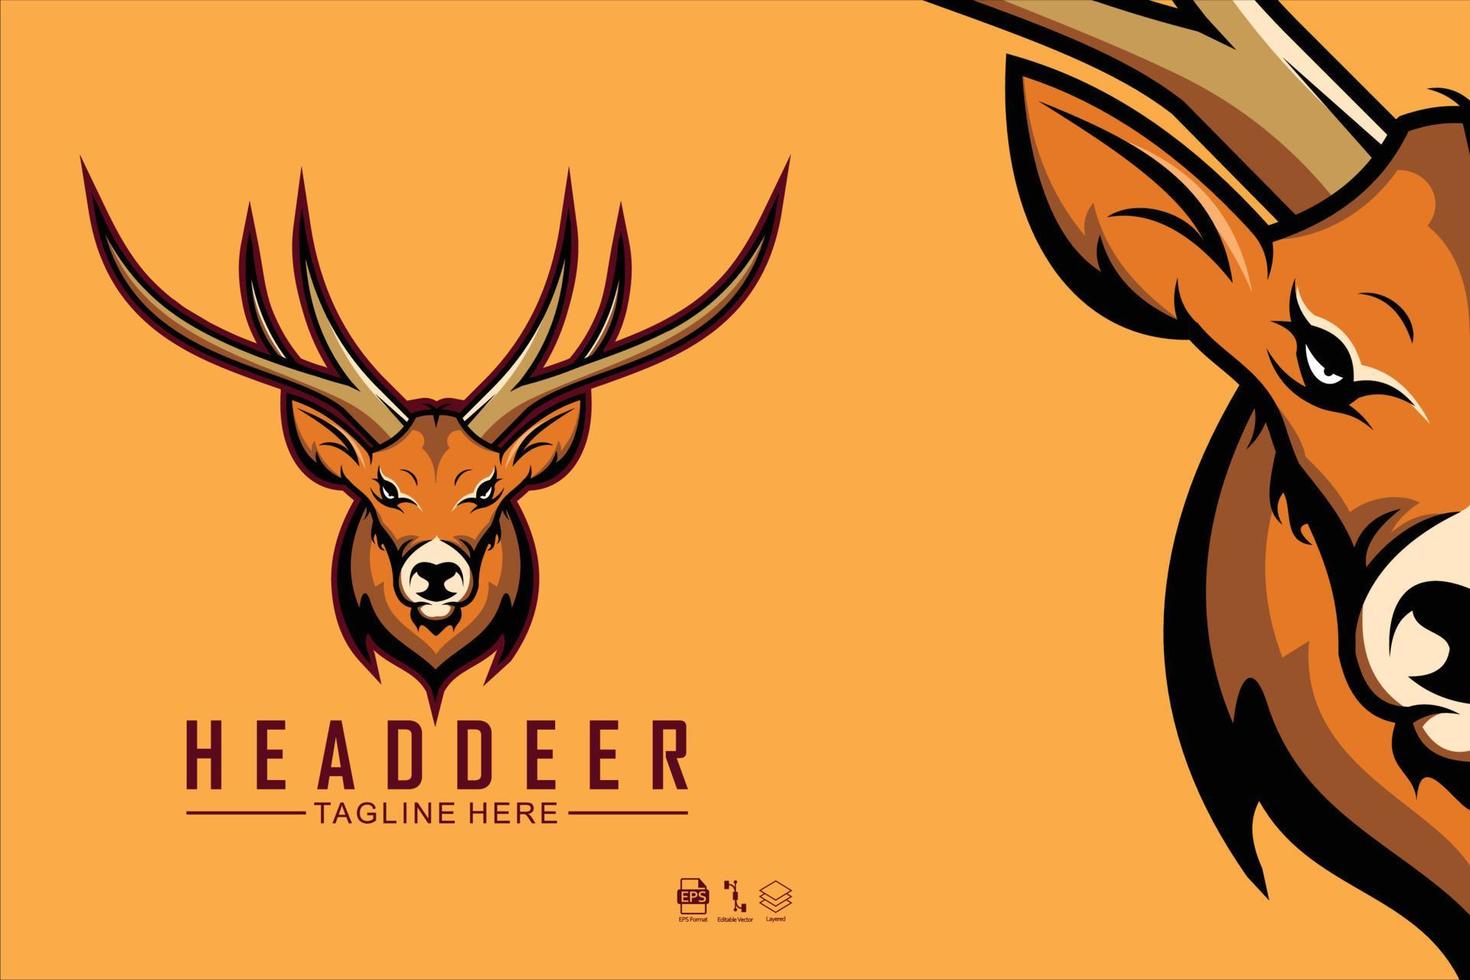 HEAD DEER ILLUSTRATION WITH A YELLOW BACKGROUND.eps vector